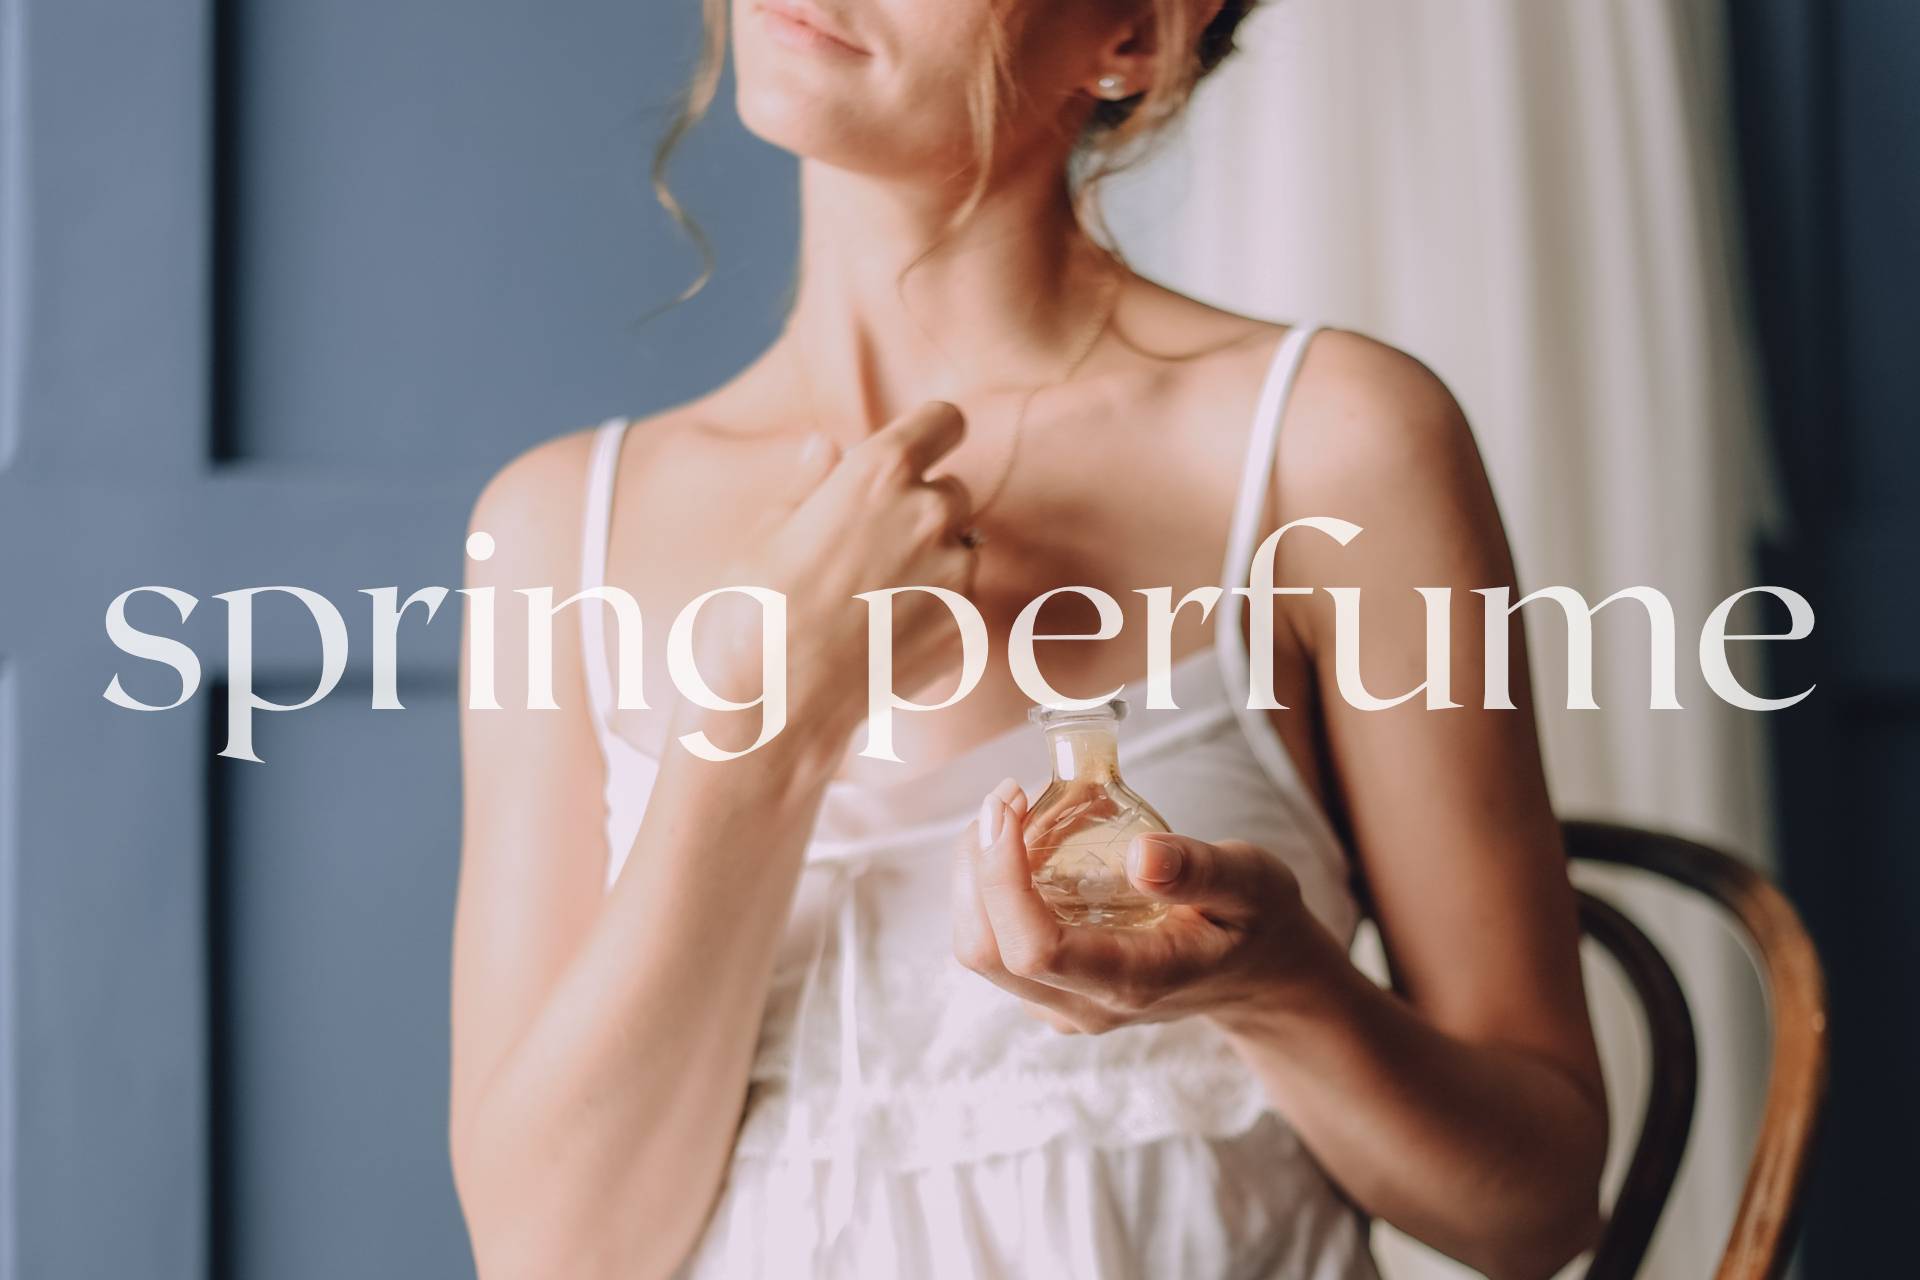 Spring Is Here: 11 perfumes that “smell” of spring